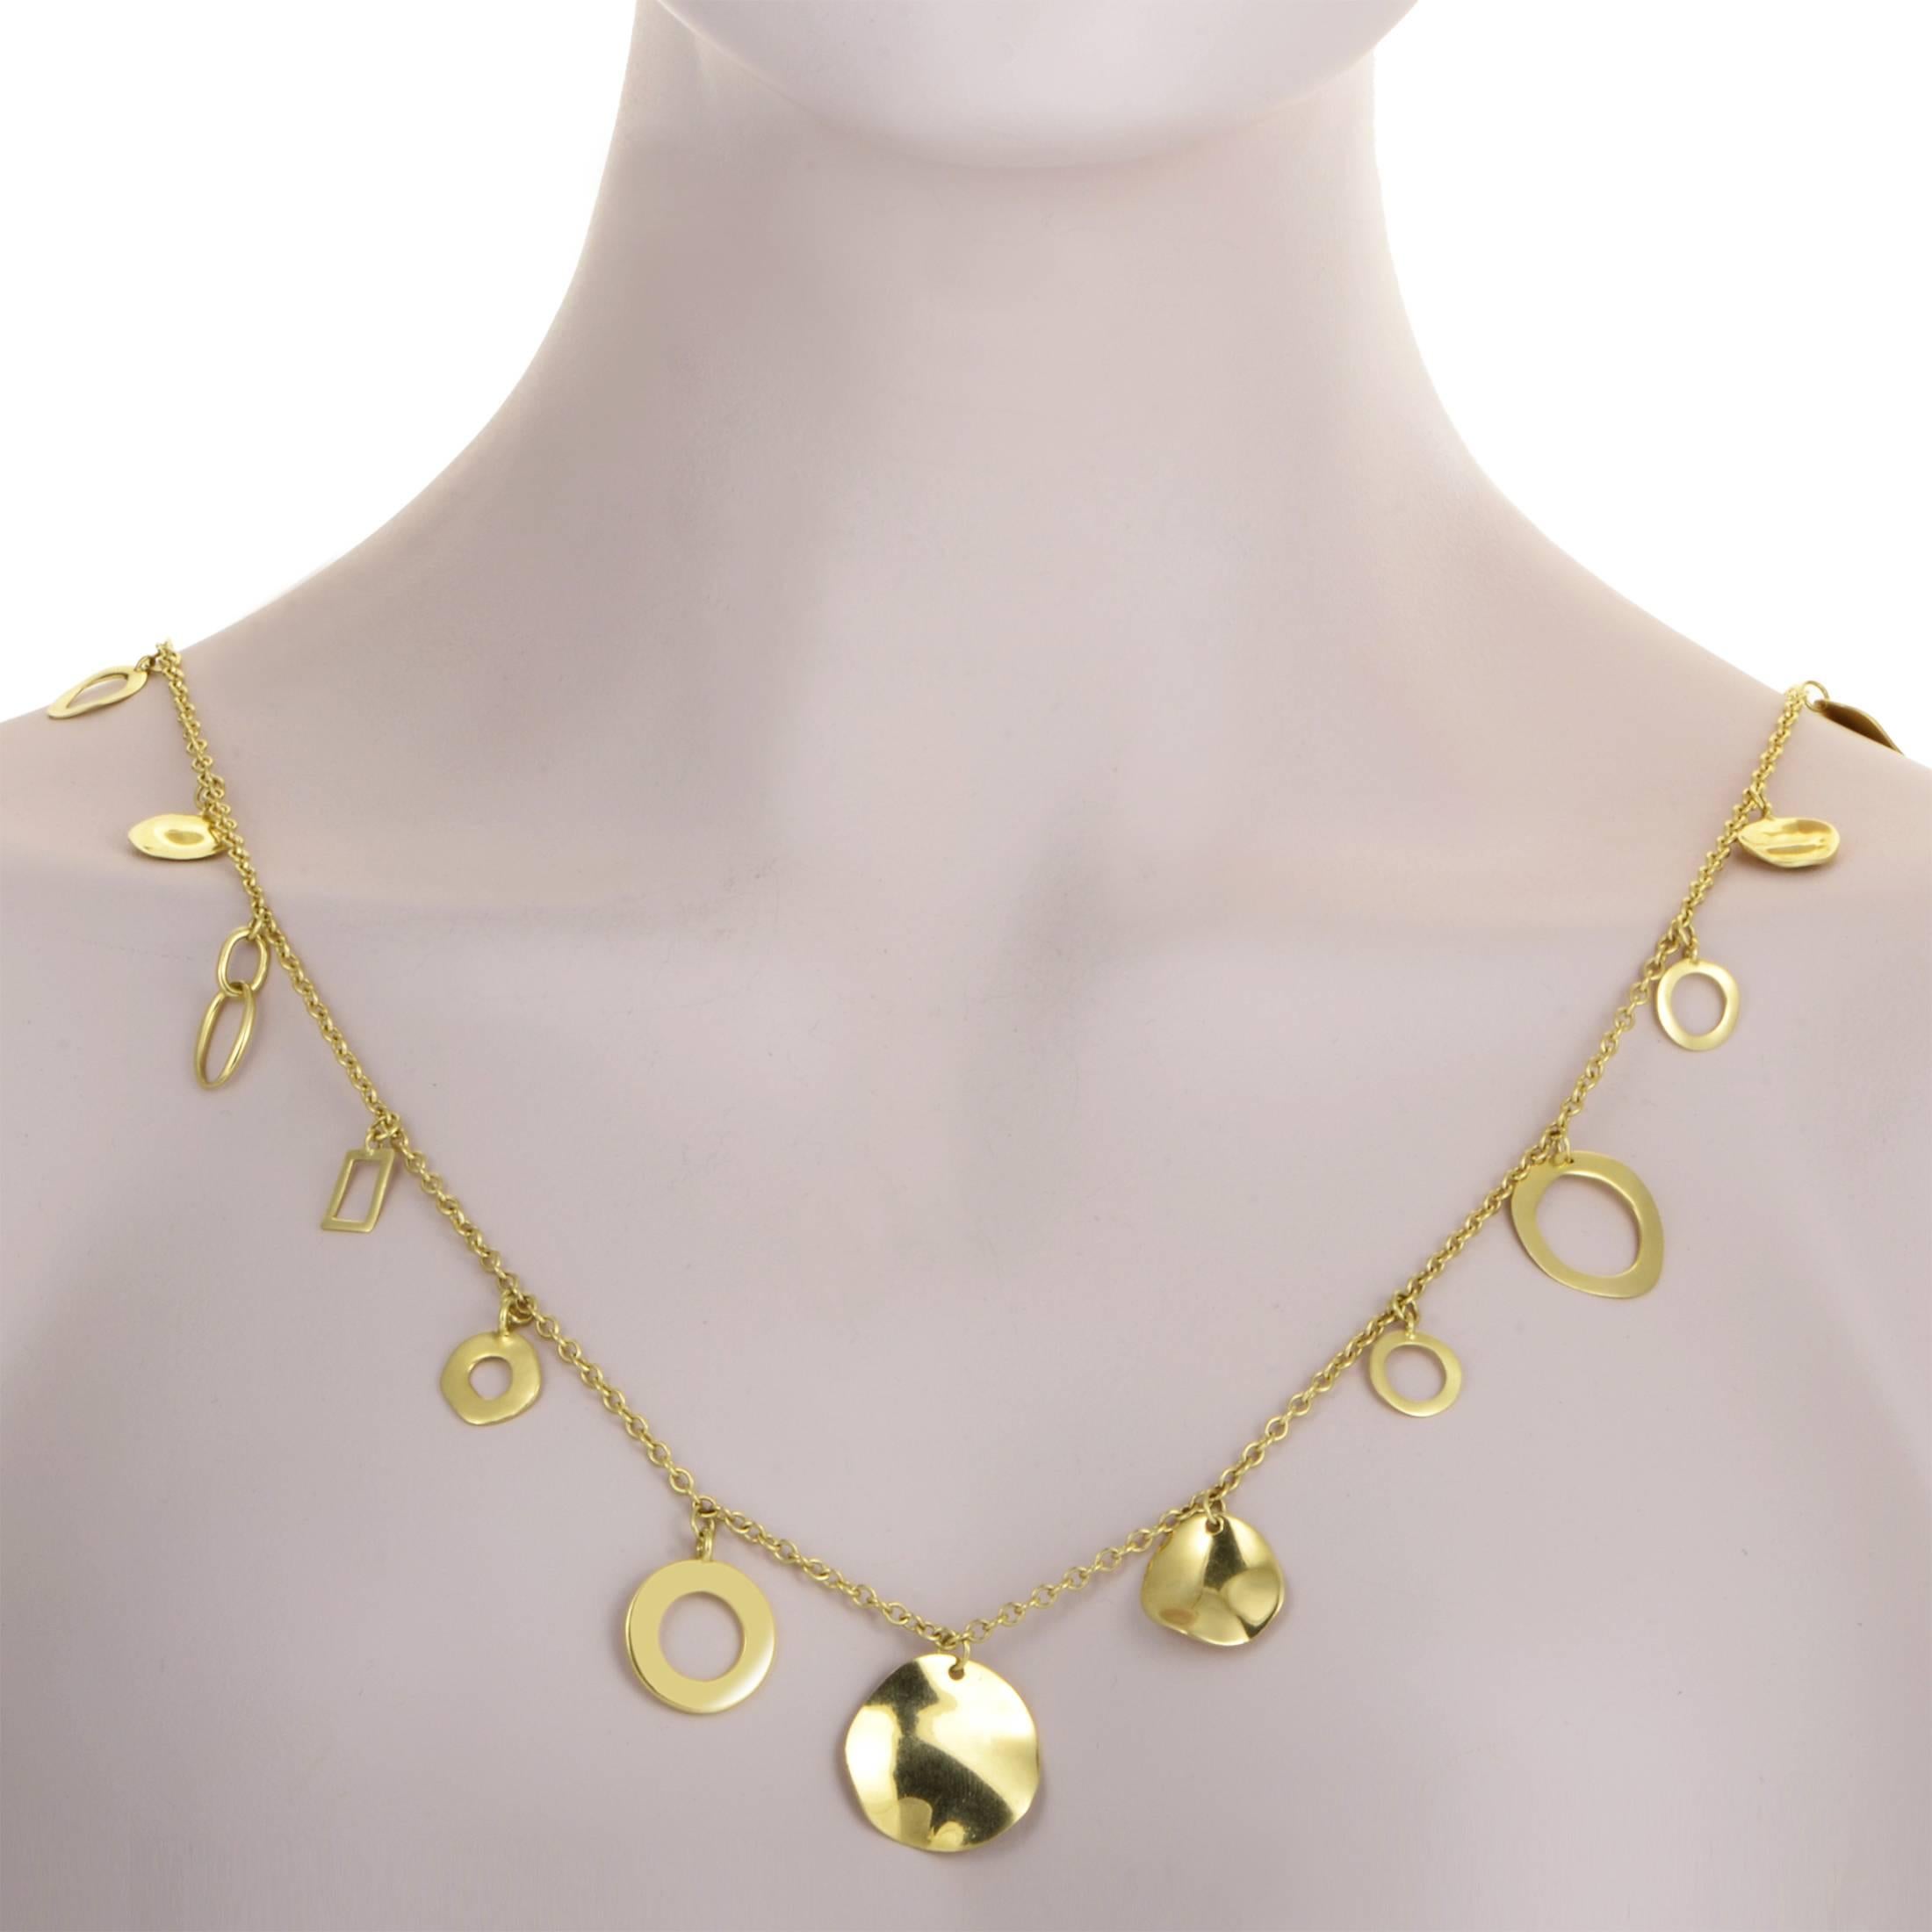 Presenting the luxurious and fabulous 18K yellow gold in many diverse shapes which all boast impeccable polish to enhance the inherent allure of this precious metal, Ippolita created this delightful necklace that boasts adorable charms along its